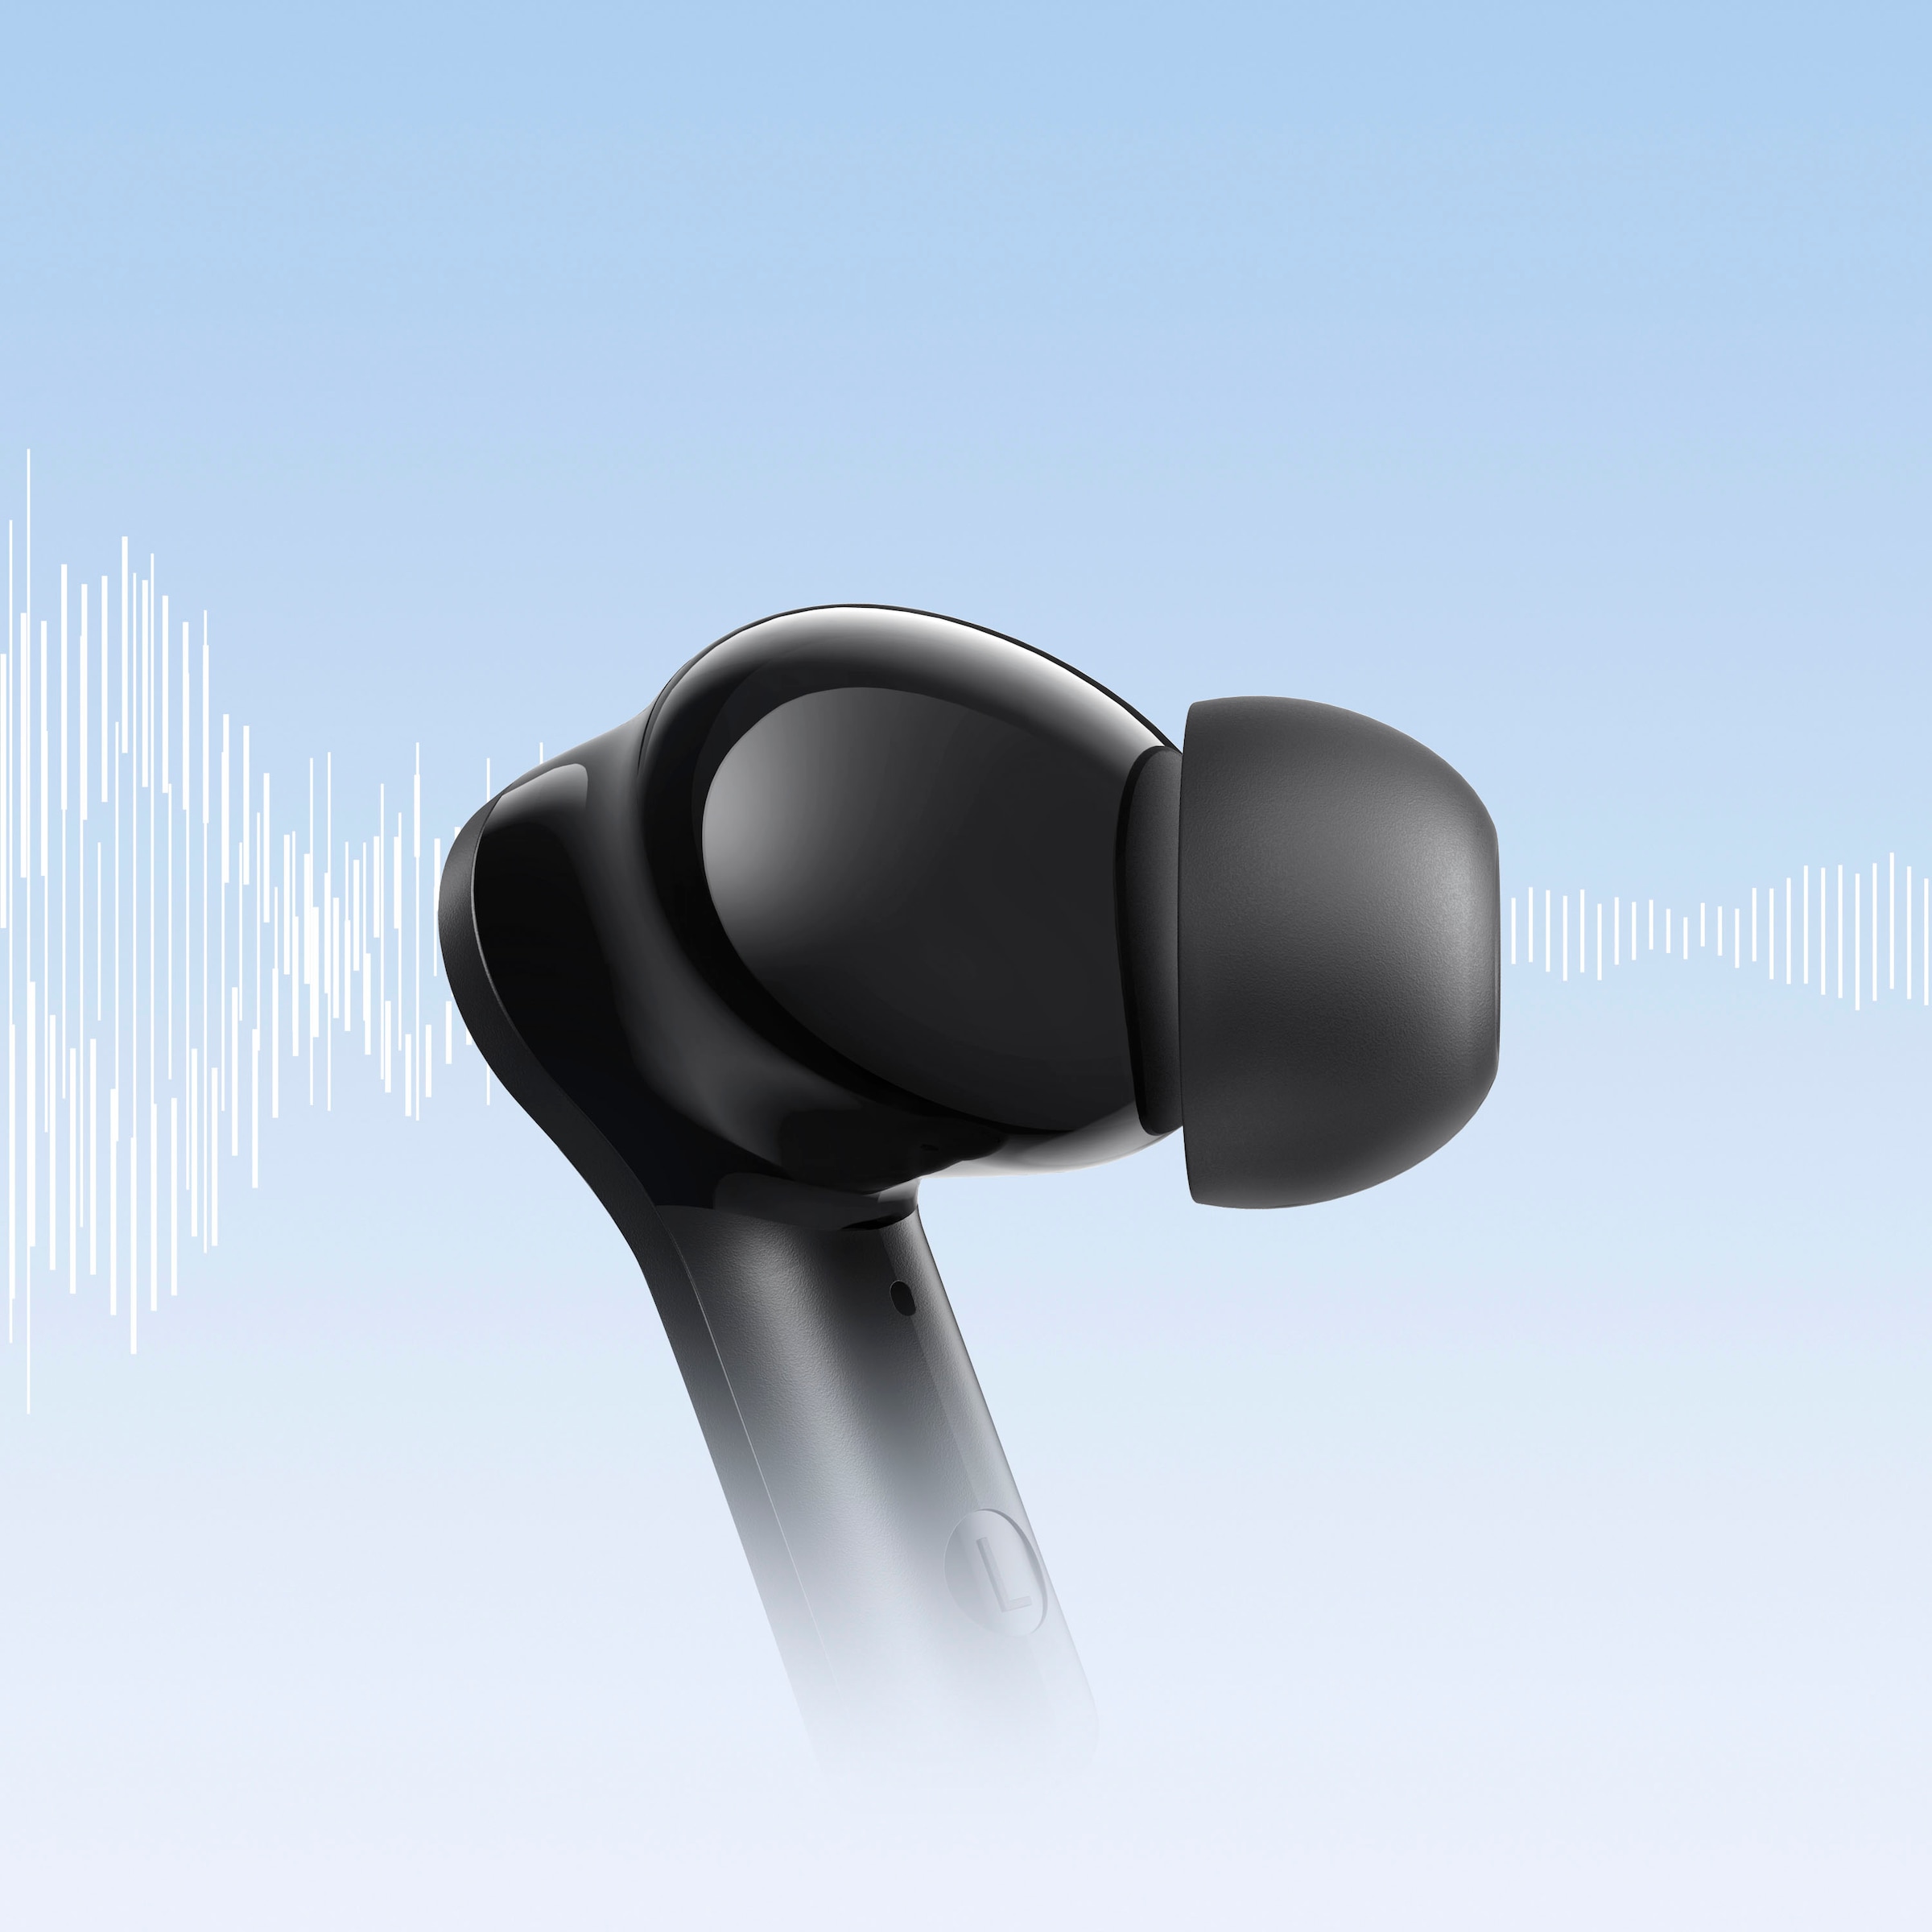 Headset »SOUNDCORE Note 3i«, Bluetooth-HFP, Rauschunterdrückung-Active Noise...